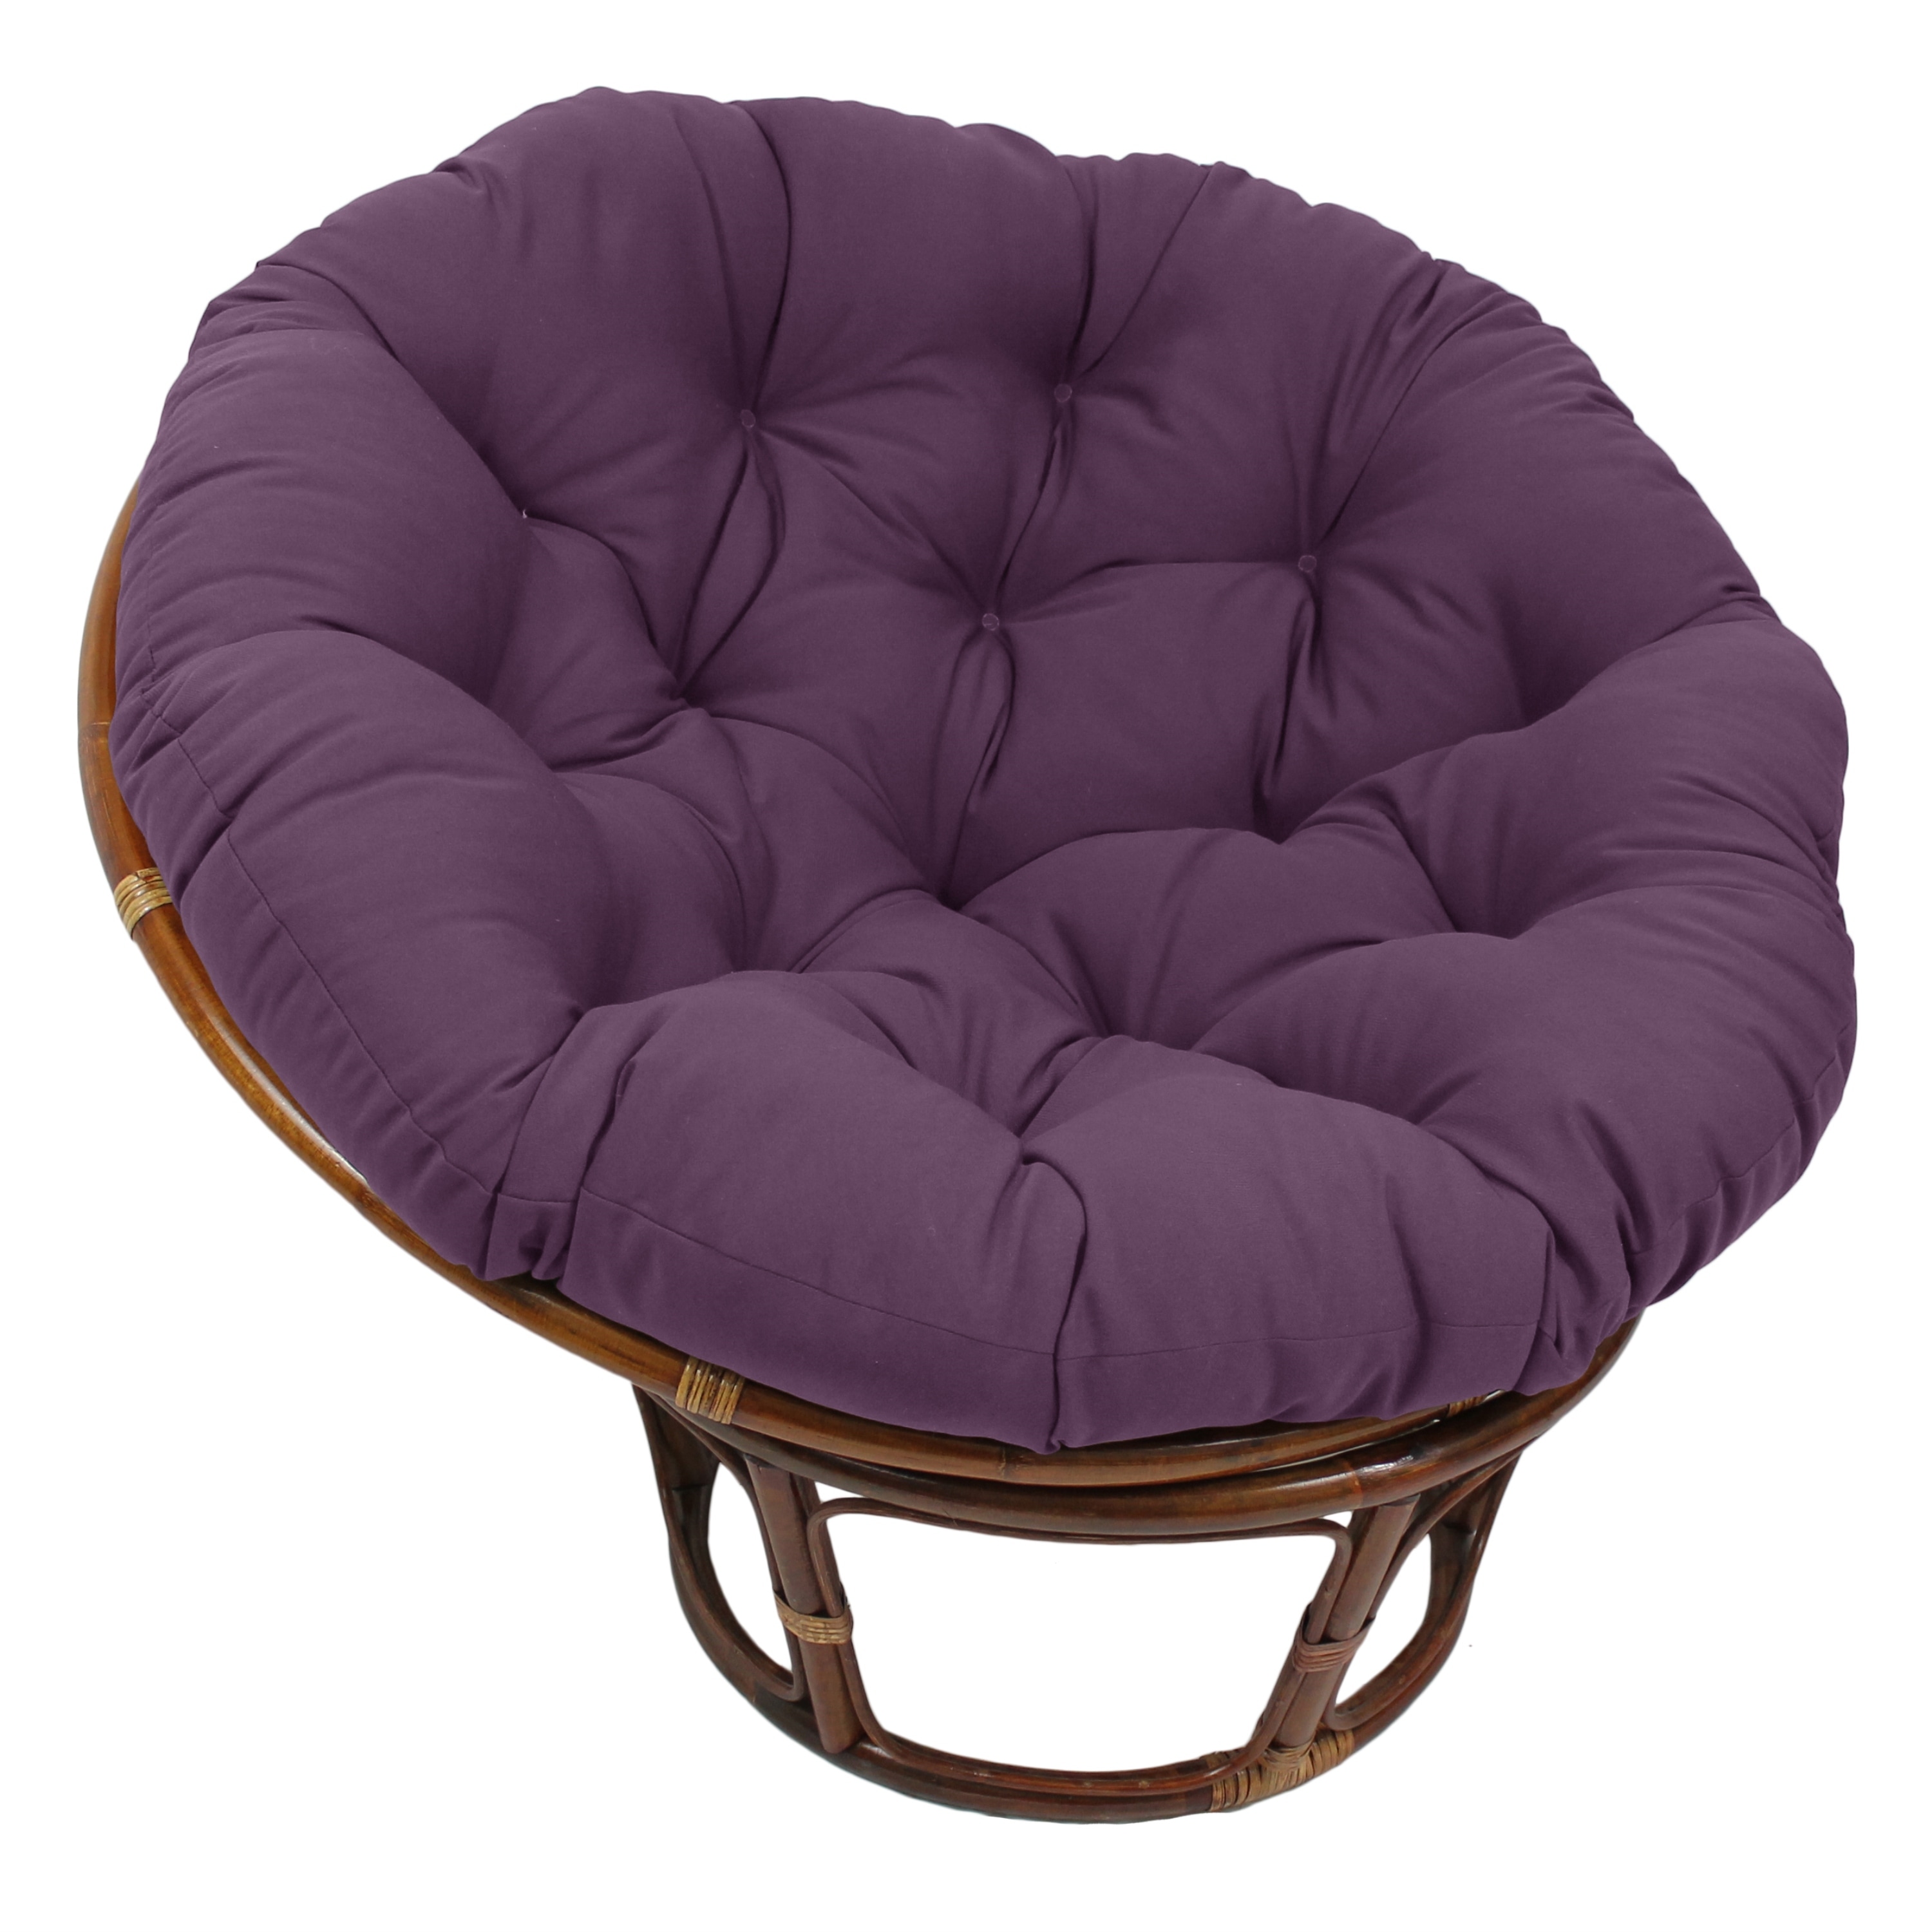 https://ak1.ostkcdn.com/images/products/is/images/direct/e56a02d112c92a1eaa2c588d40fa3bedac5a8fd3/48-inch-Solid-Twill-Papasan-Cushion-%28Cushion-Only%29.jpg